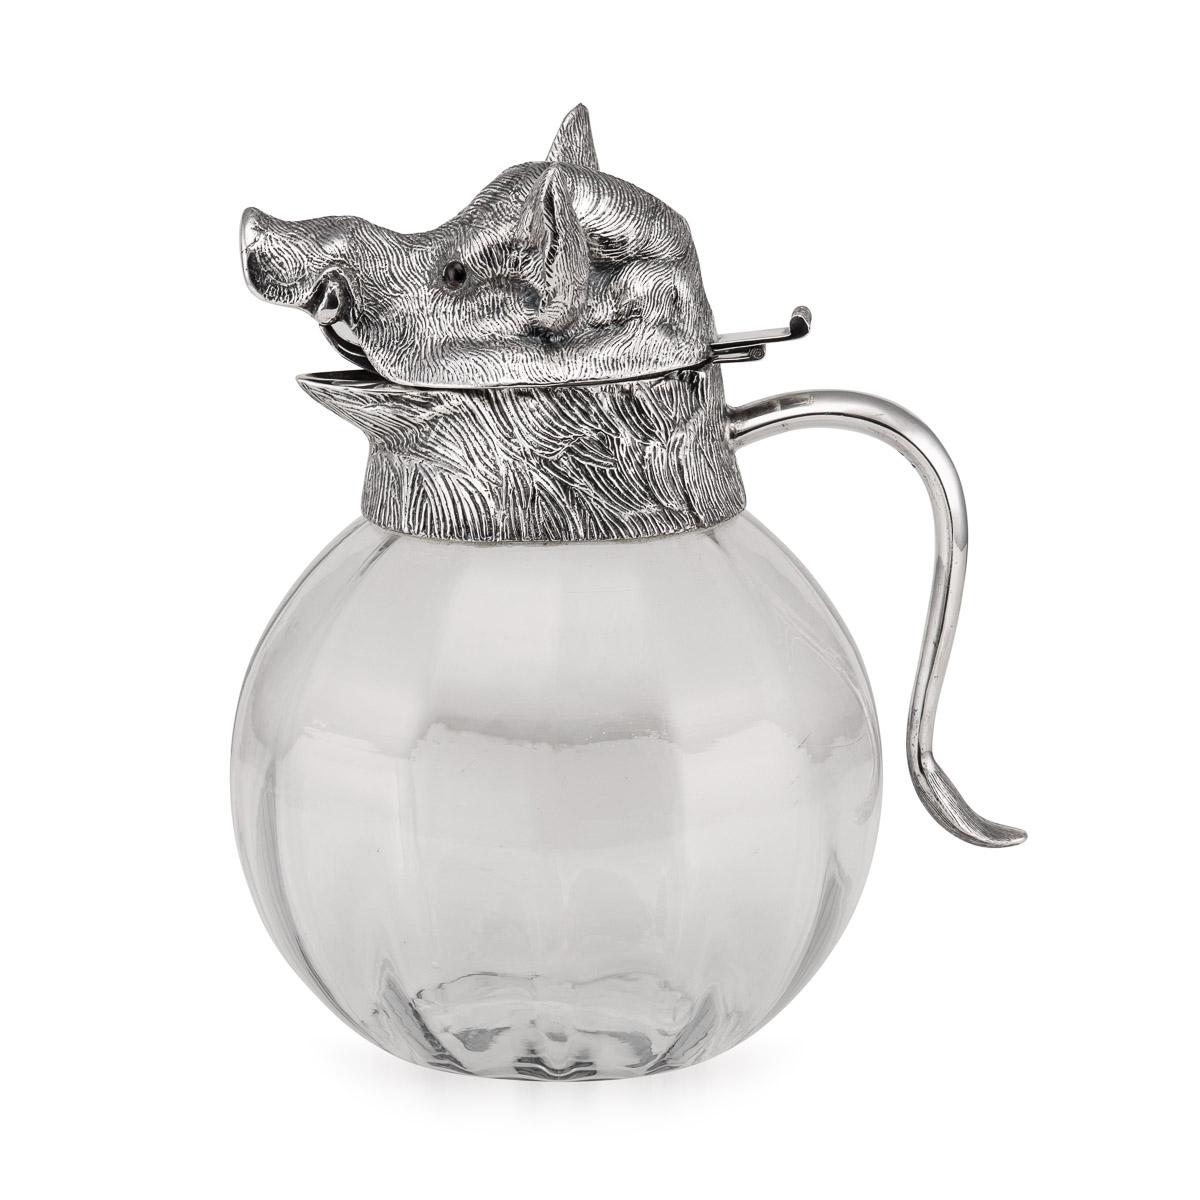 Superb mid-20th Century silver plated mounted novelty claret jug modelled as a boars head, with plain glass body, the tail forming the handle, hinged head set with glass eyes, accompanied by a set of four cups, hallmarked with the makers mark